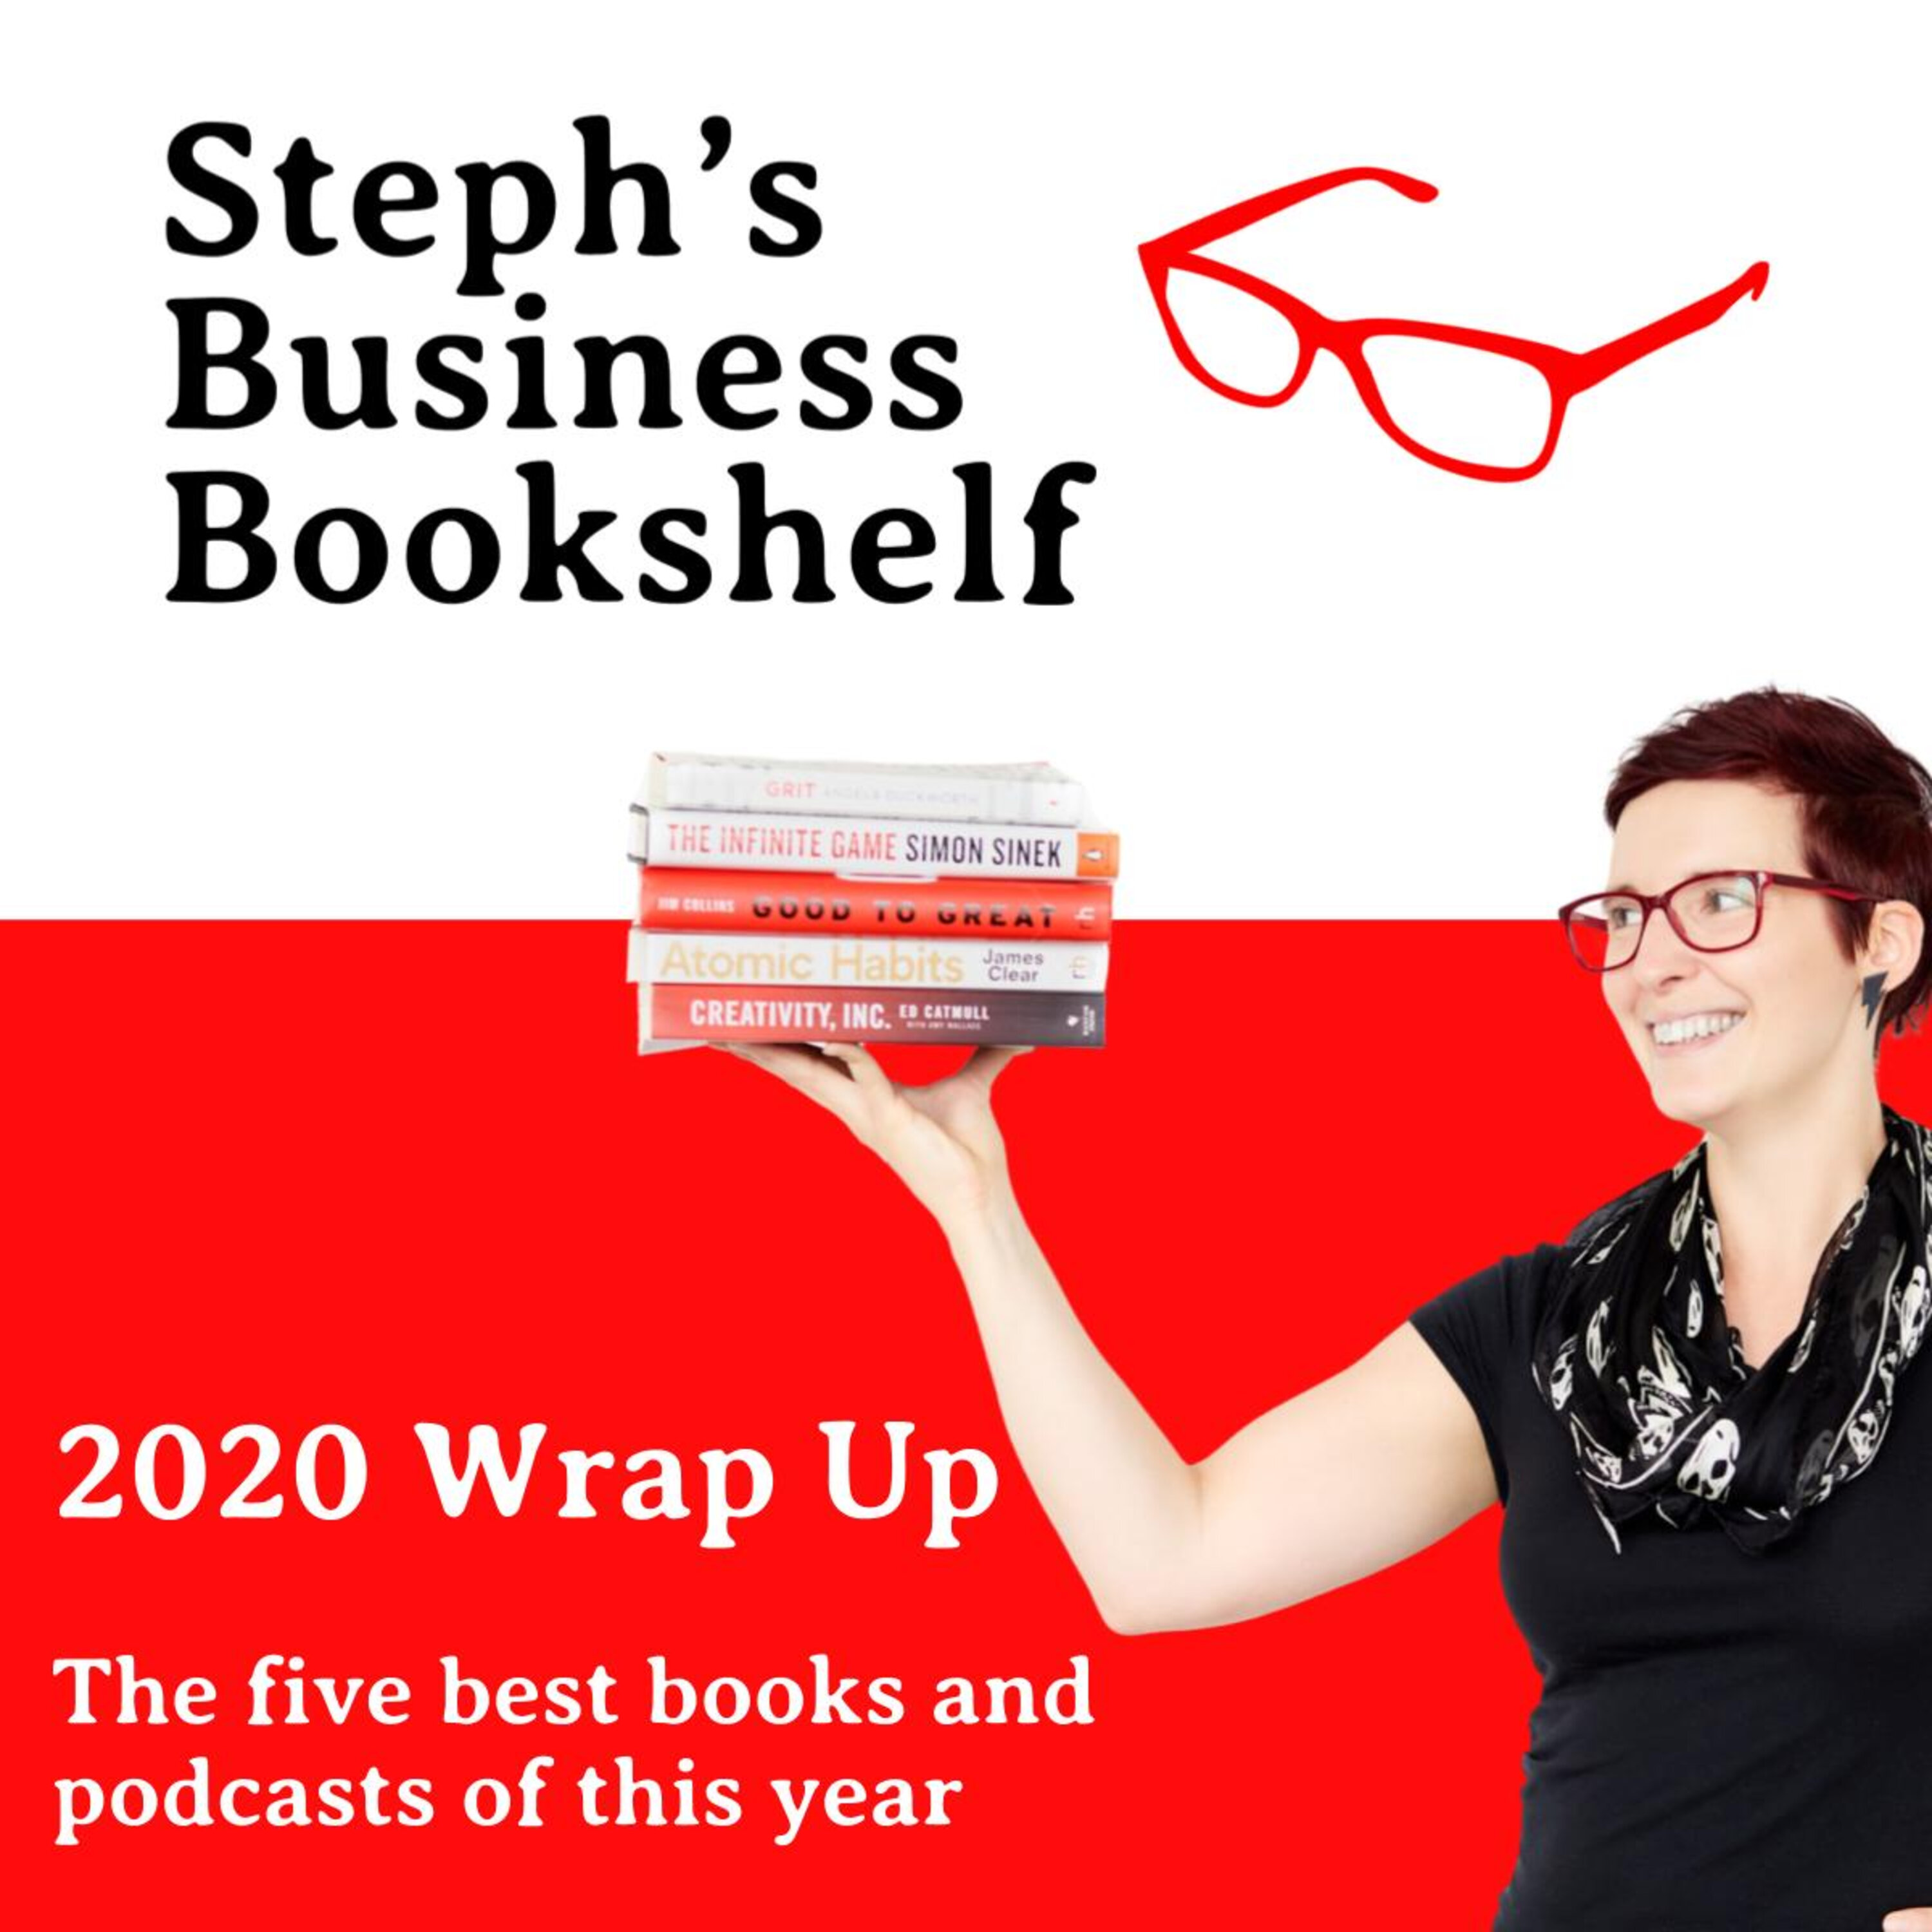 2020 Wrapped Up: The five best books and podcasts of this year